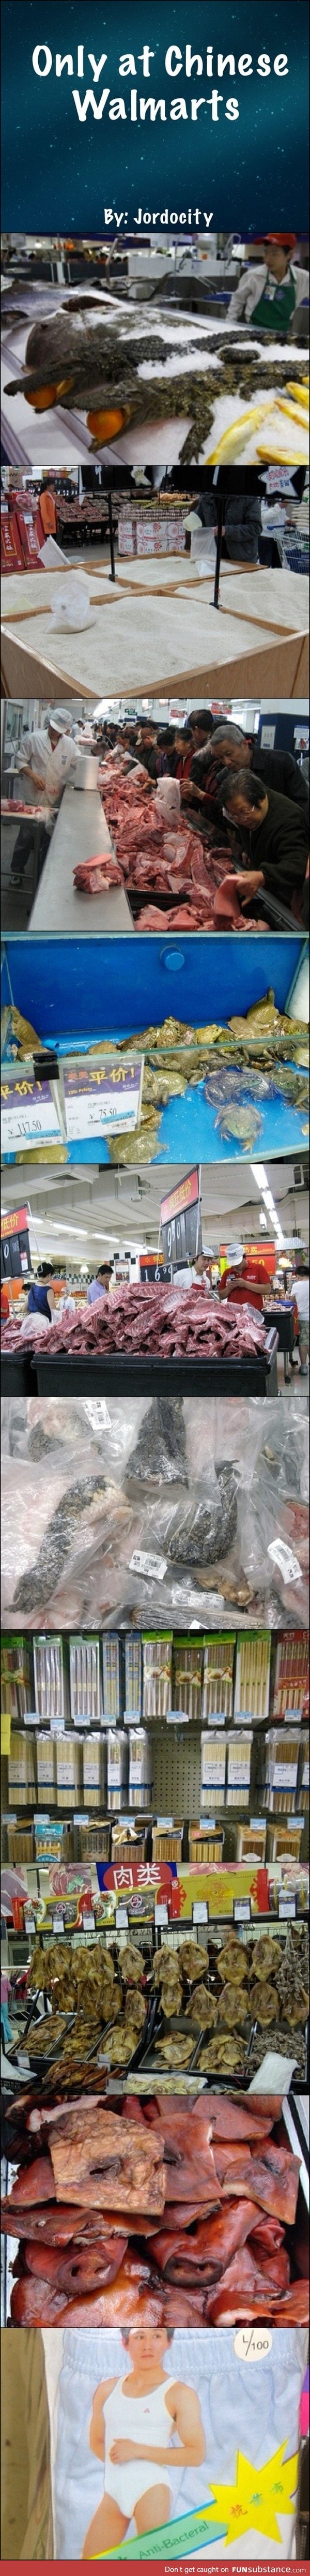 The stuff they sell at Chinese Wal-Marts